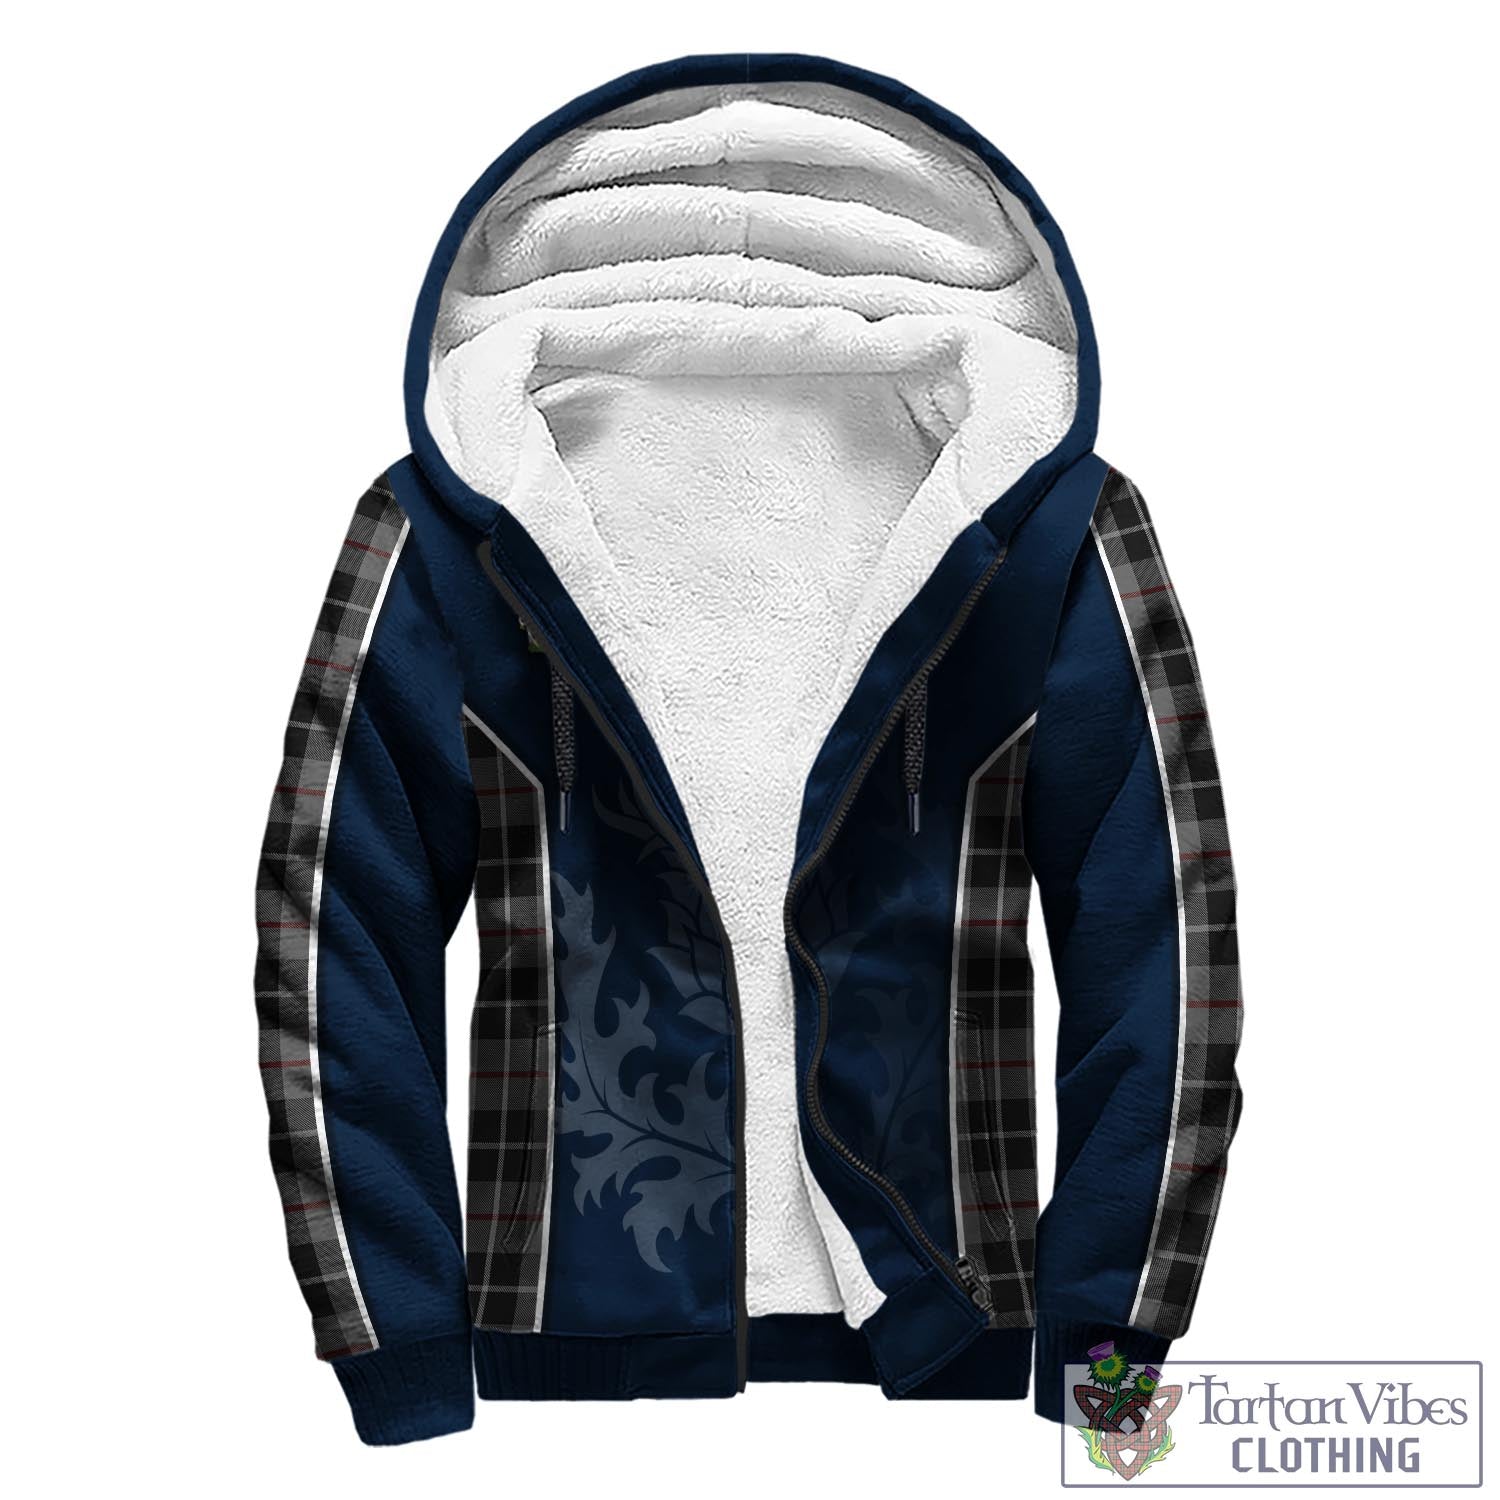 Tartan Vibes Clothing Thompson Grey Tartan Sherpa Hoodie with Family Crest and Scottish Thistle Vibes Sport Style